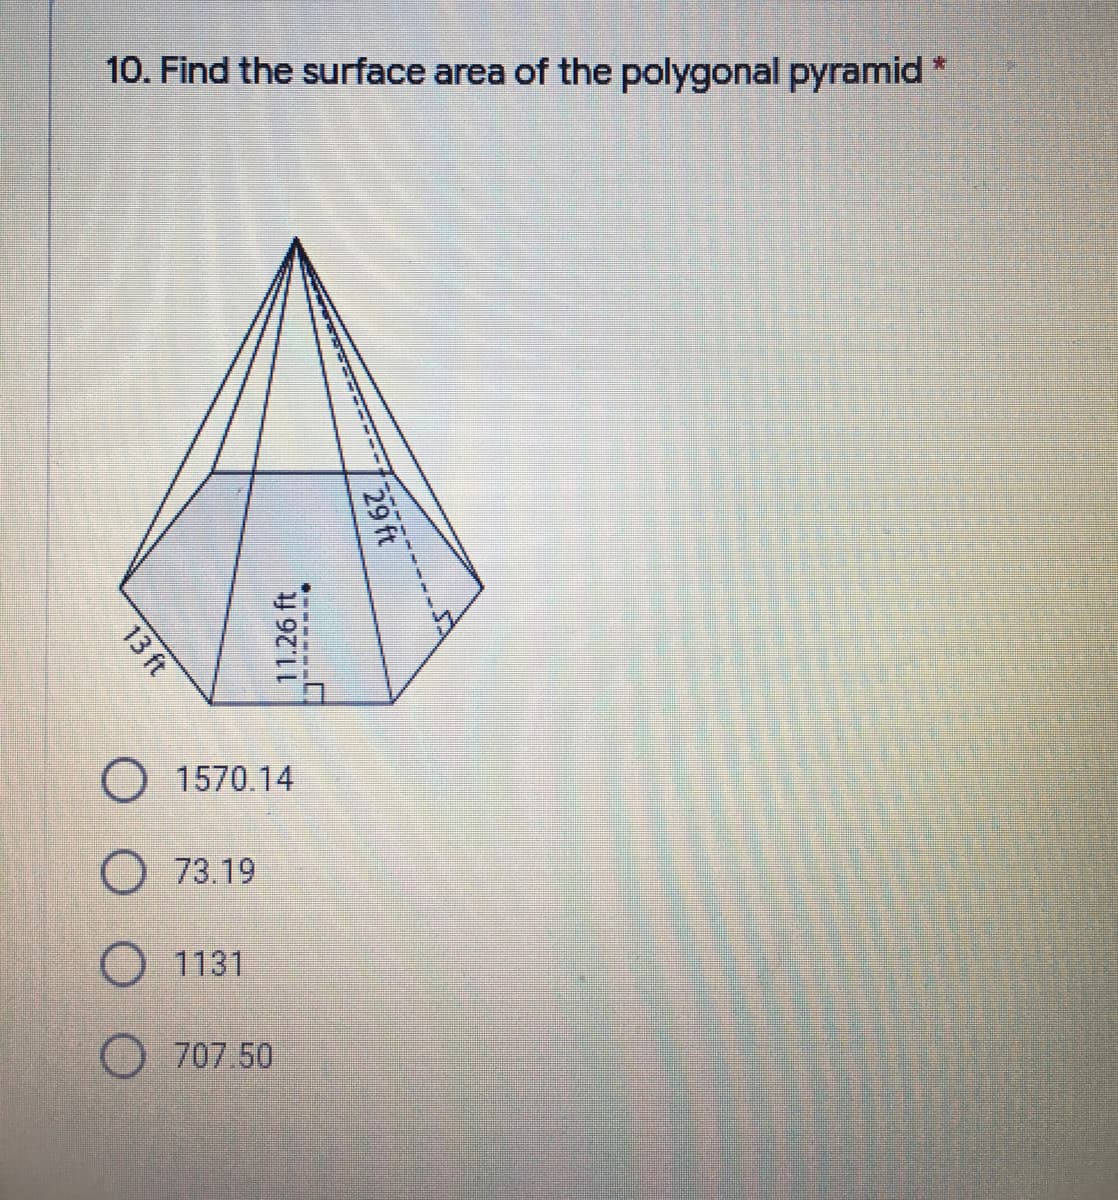 10. Find the surface area of the polygonal pyramid
*:
1570.14
O 73.19
O 1131
707.50
29 ft
11.26 ft
13 ft
